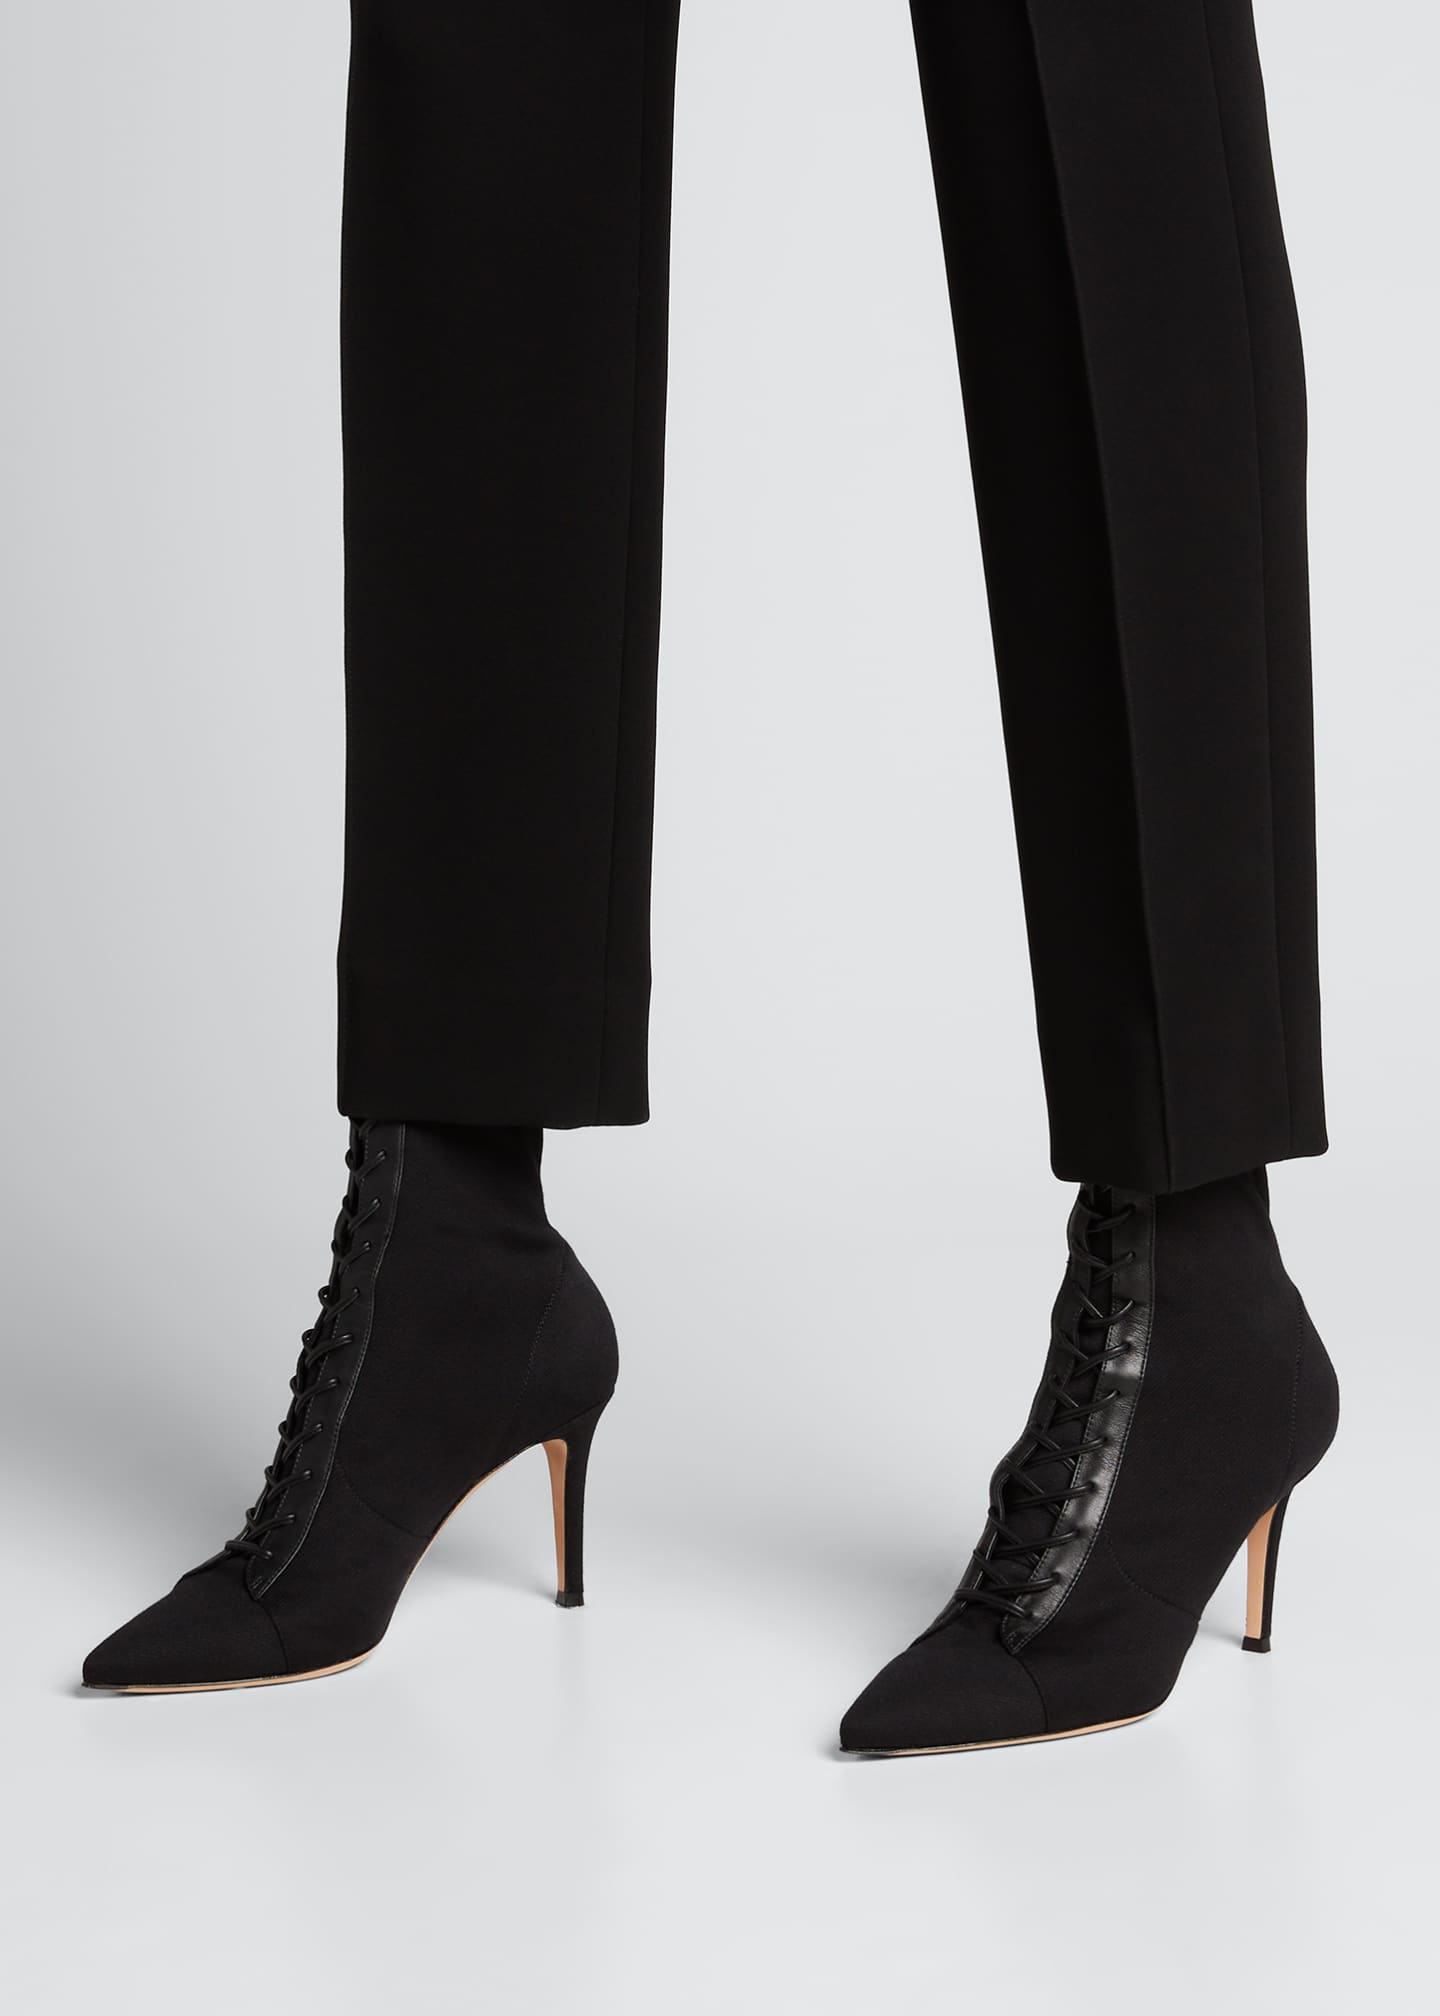 Gianvito Rossi 85mm Stretch Lace-Up Stiletto Booties - Bergdorf Goodman